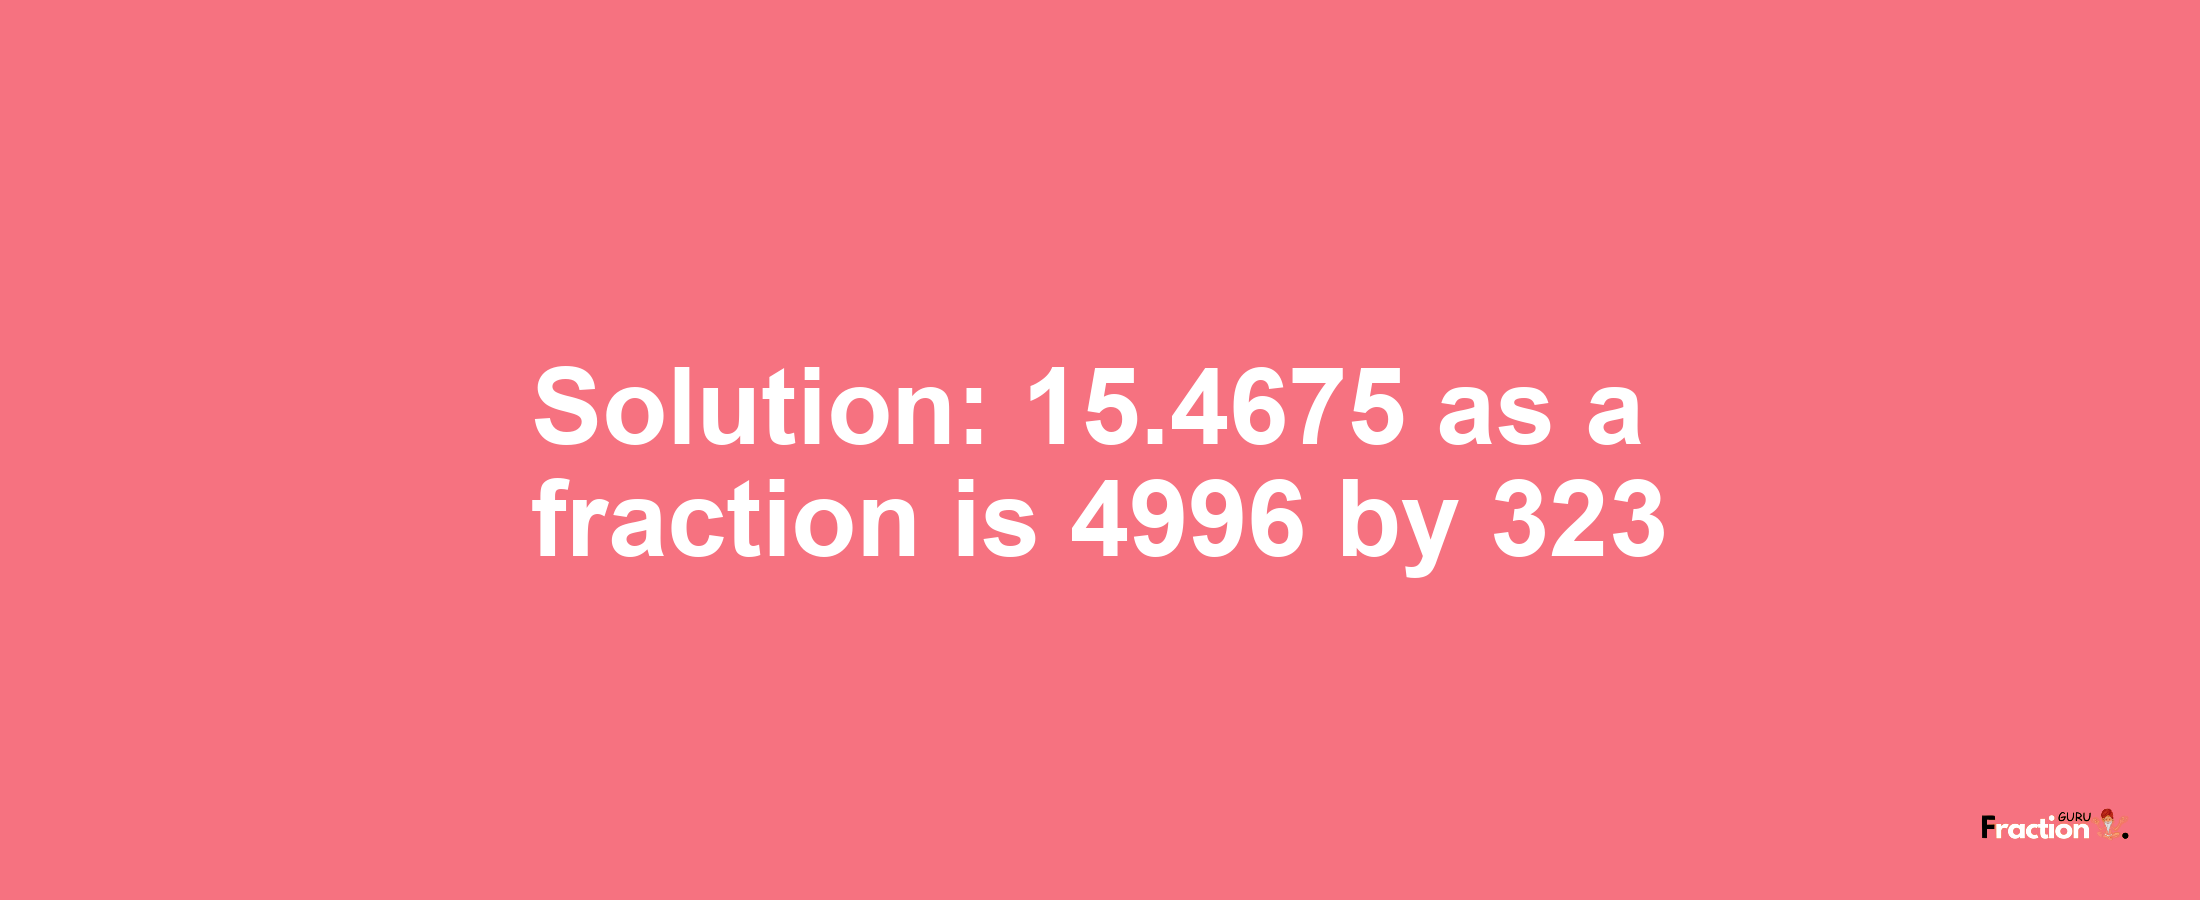 Solution:15.4675 as a fraction is 4996/323